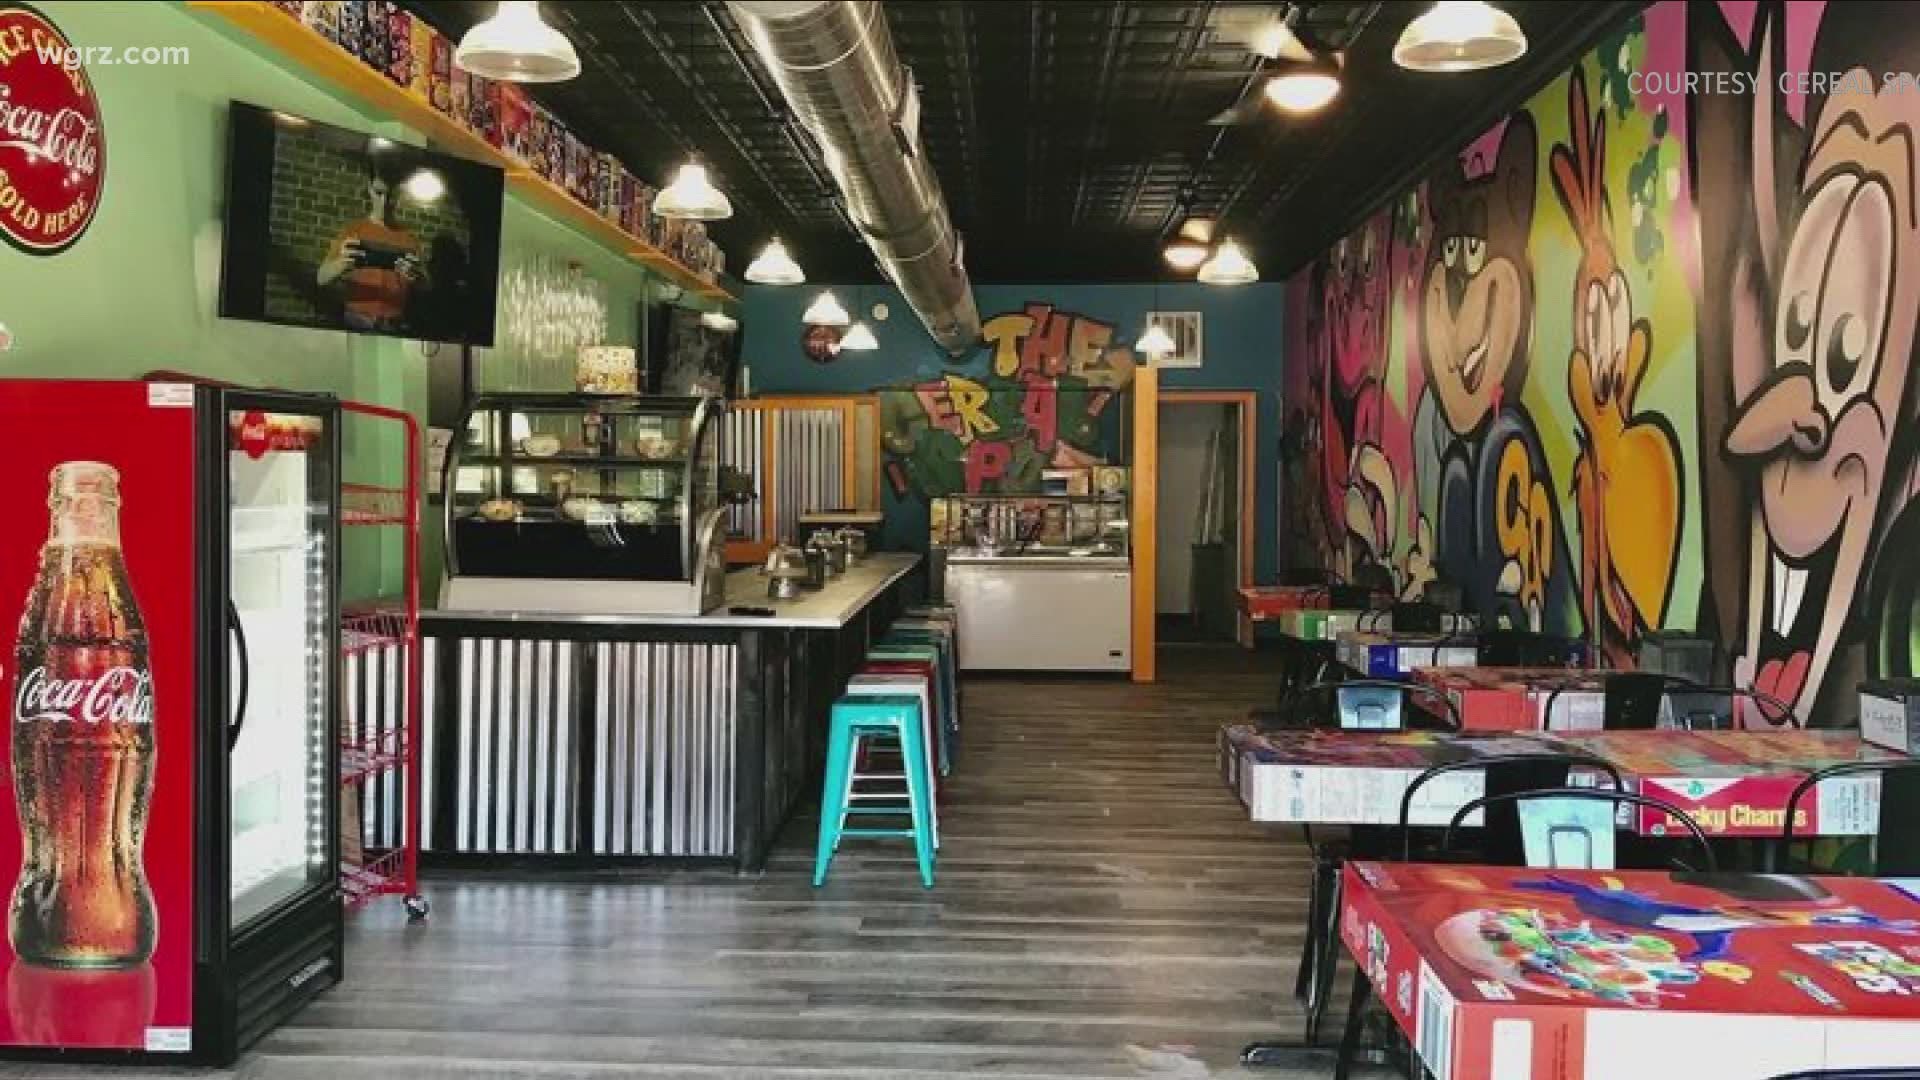 The Cereal Spot" on Hertel announced... that they're going to be opening up a week from Saturday